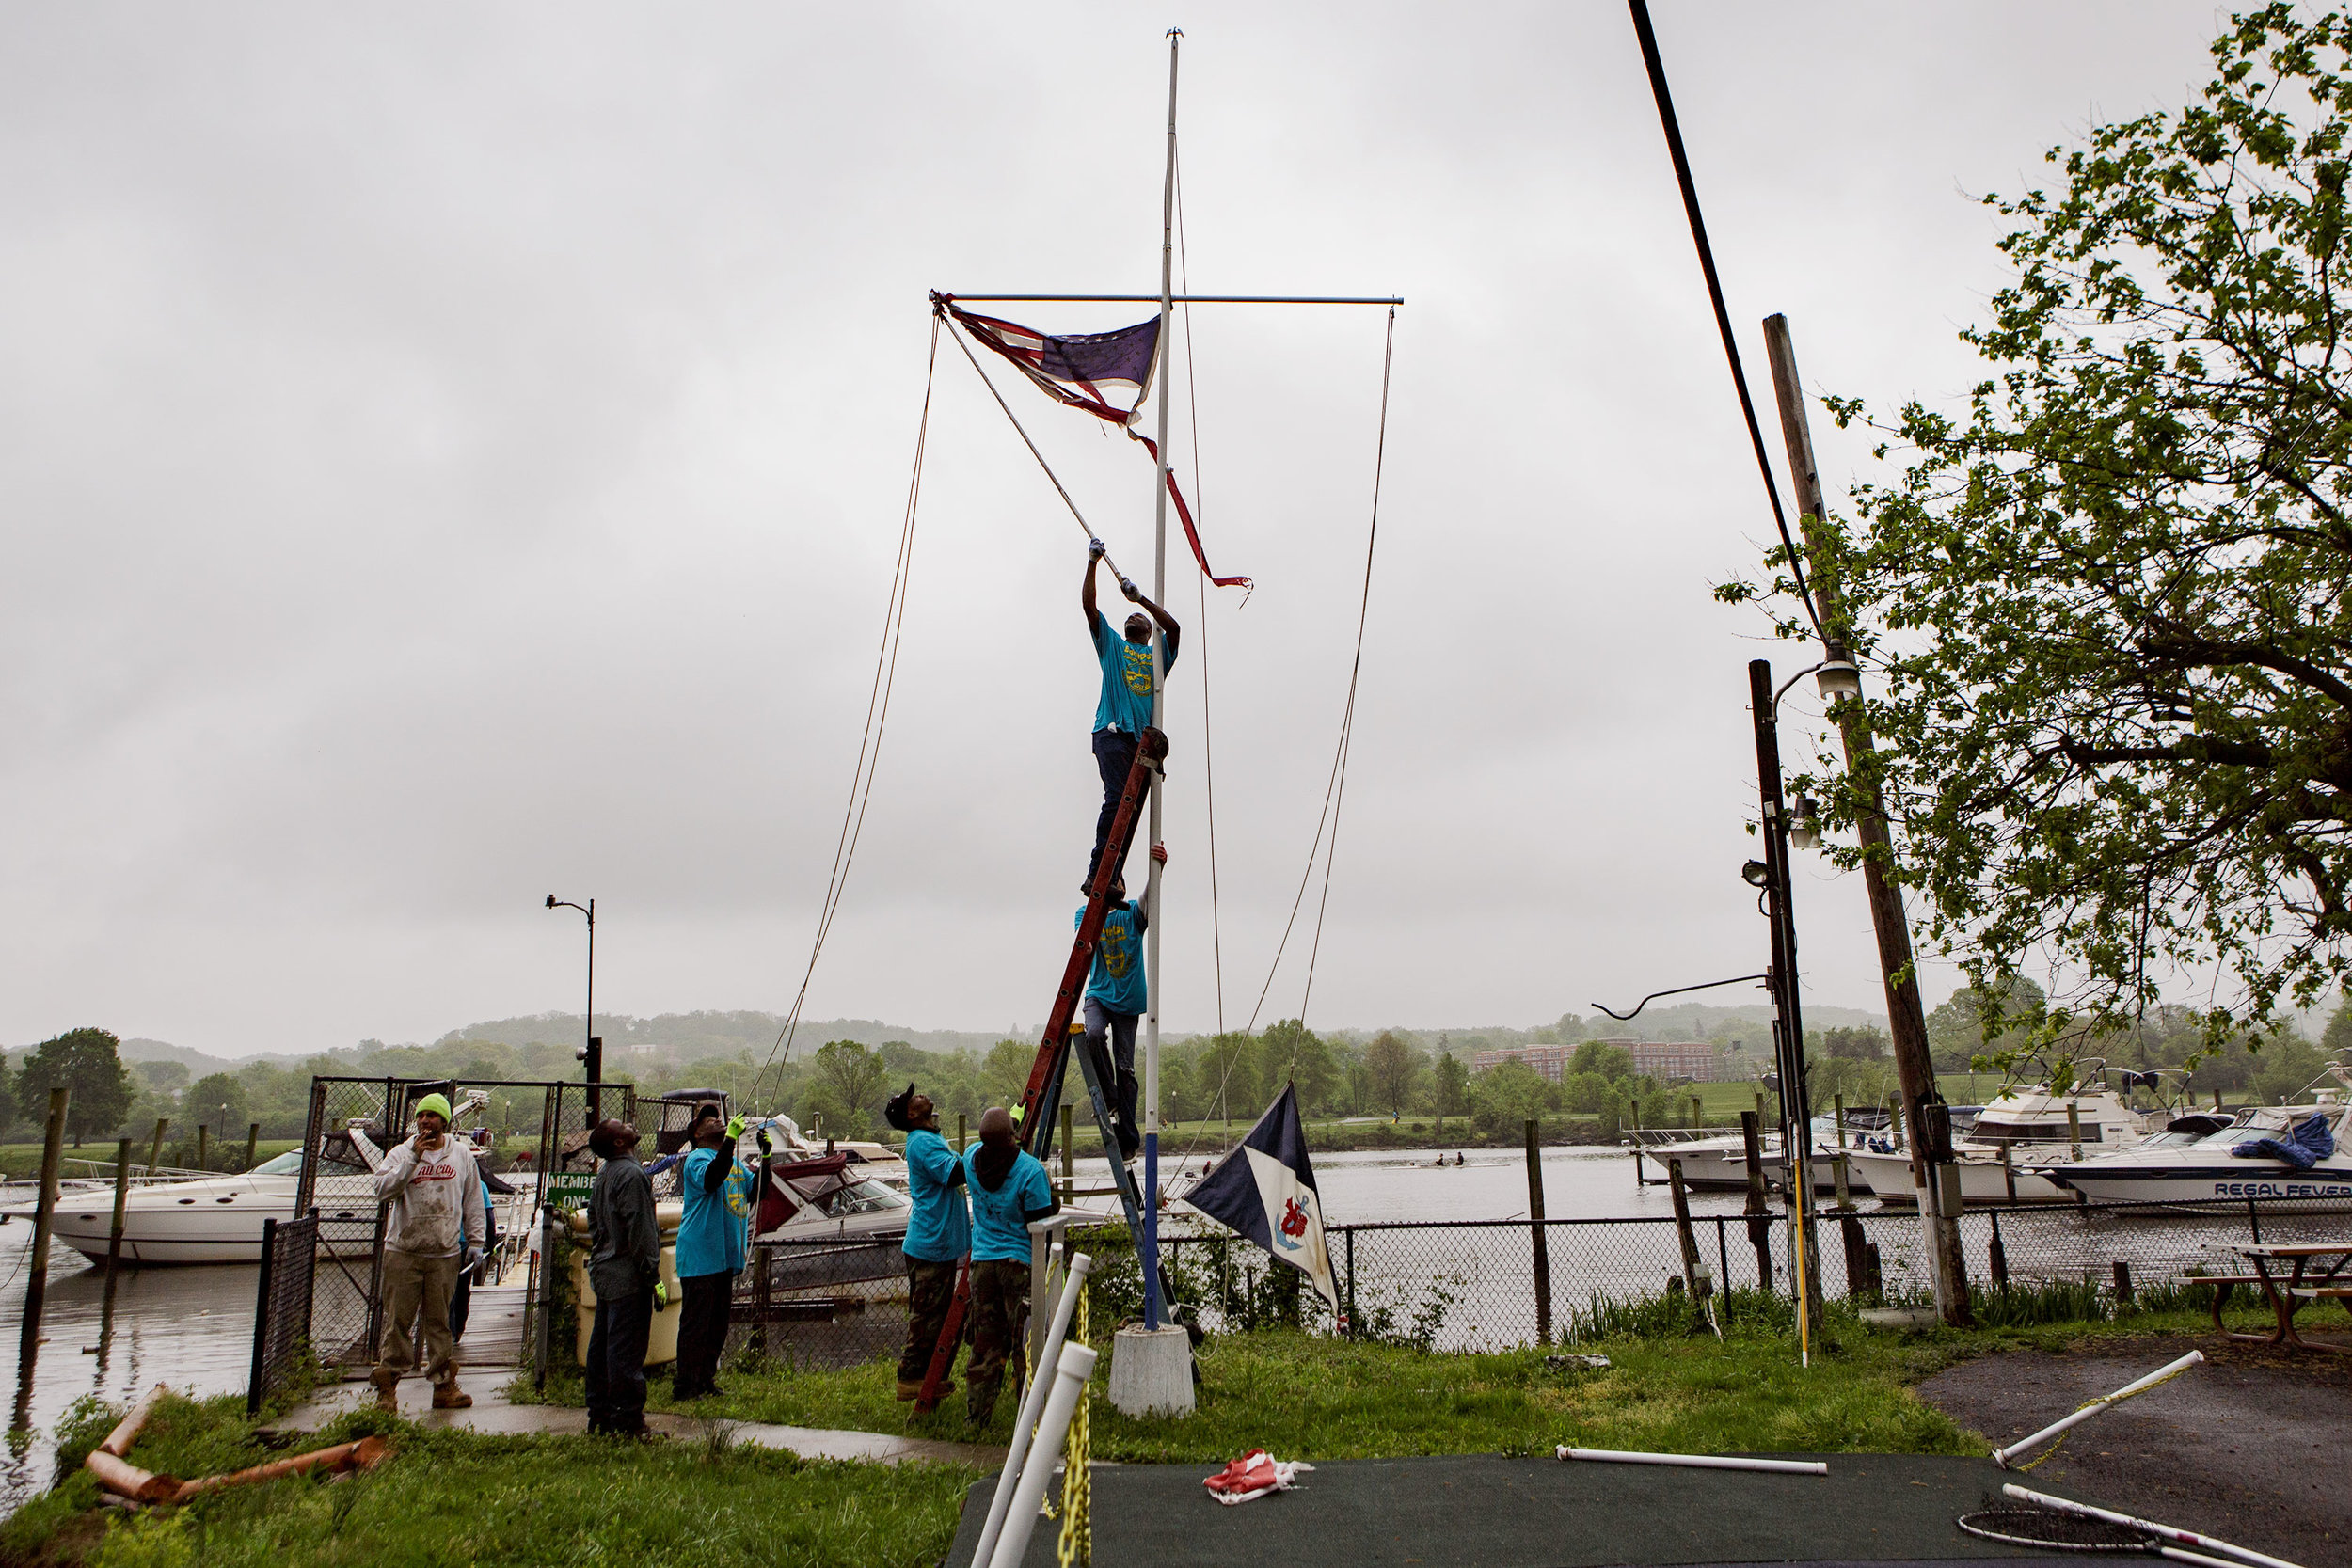  Seafarers' members work together to take down a wind-tattered American flag on Earth Day, 2017. 